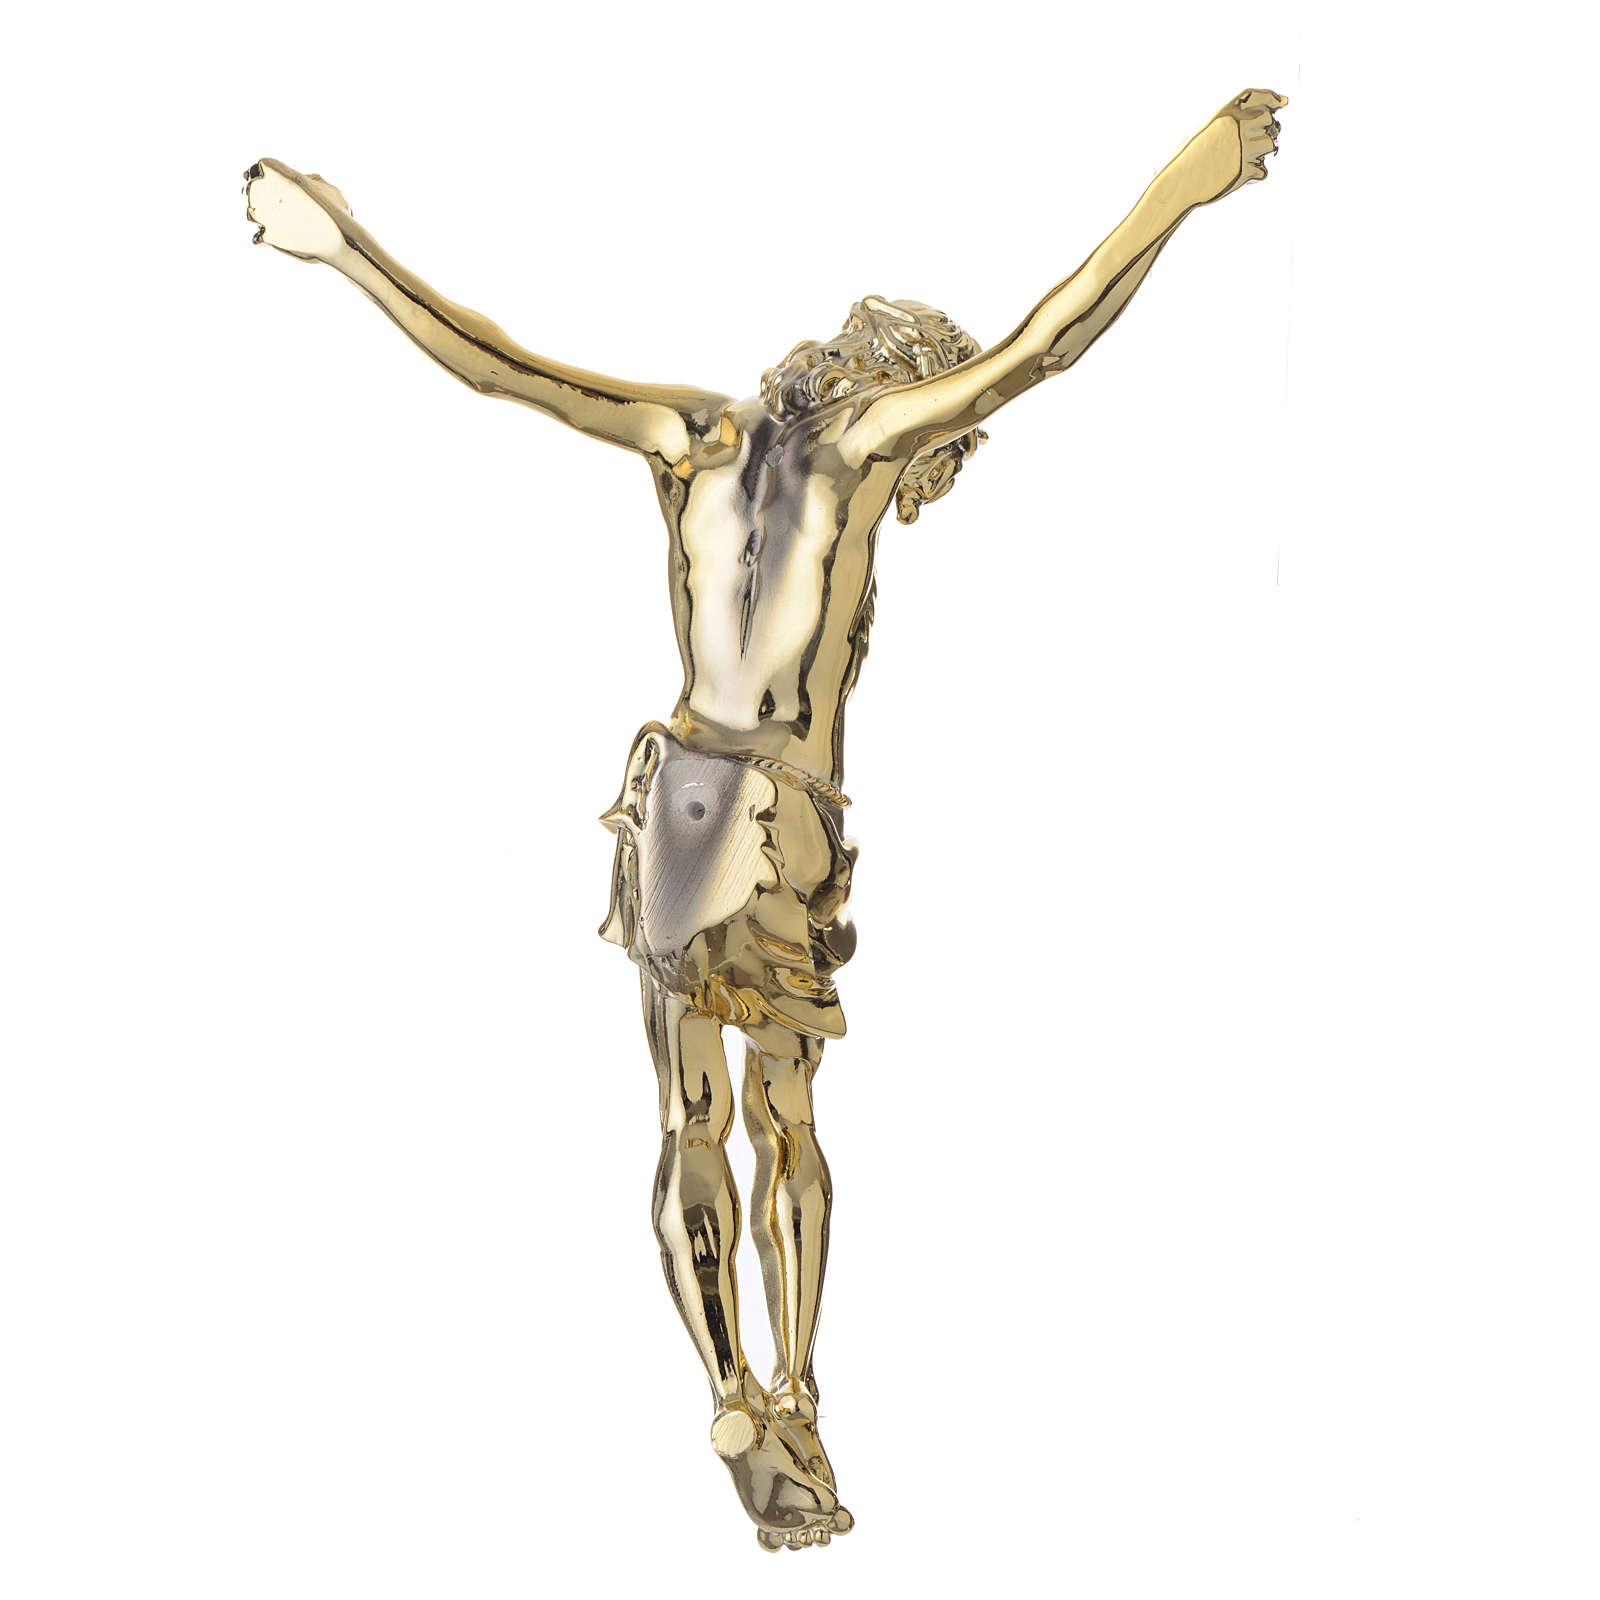 Christ's body in marble dust finished in gold | online sales on HOLYART Where Can I Buy Marble Dust